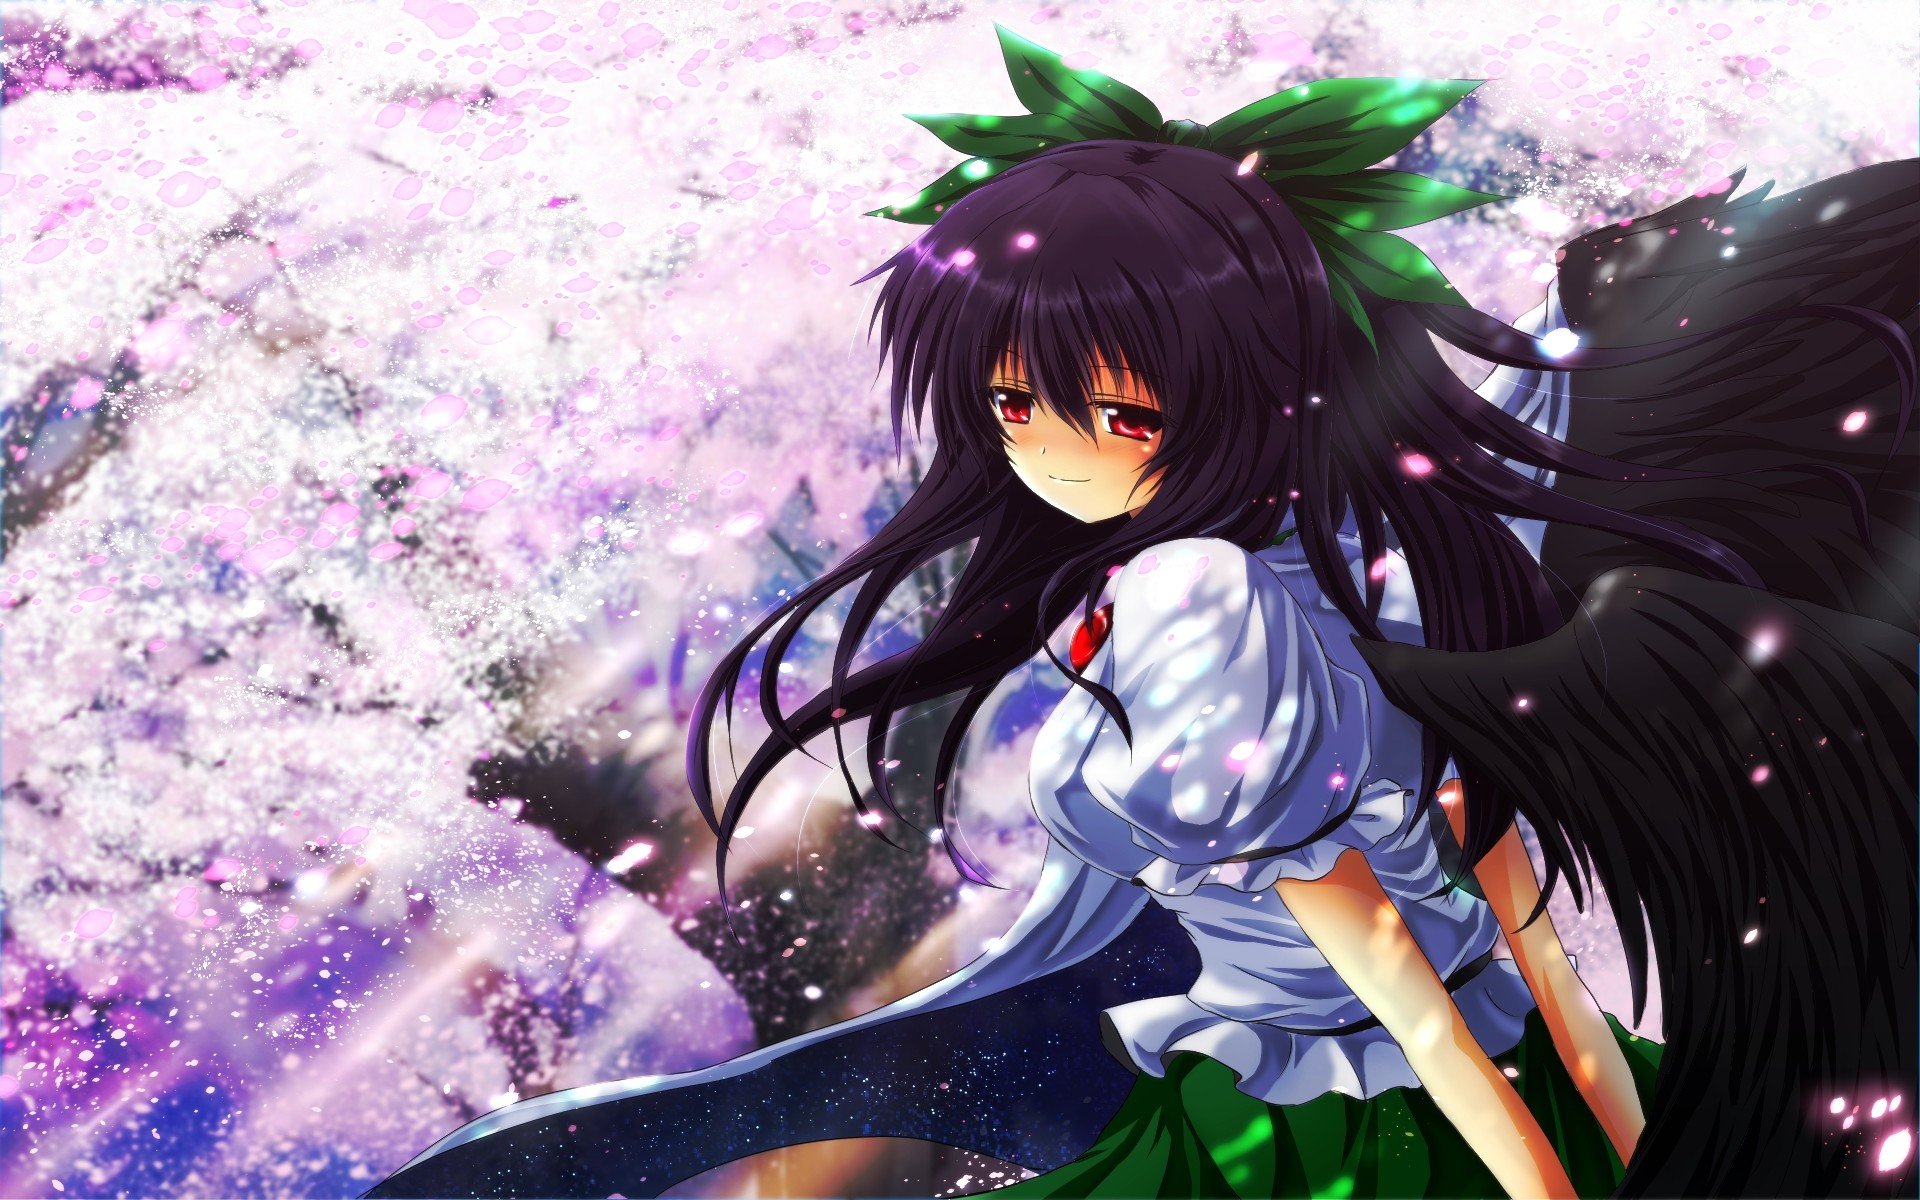 video, Games, Touhou, Wings, Outer, Space, Cherry, Blossoms, Trees, Skirts, Long, Hair, Outdoors, Red, Eyes, Sunlight, Smiling, Blush, Bows, Capes, Reiuji, Utsuho, Flower, Petals, Hands, Behind, Back, Anime, Gir Wallpaper